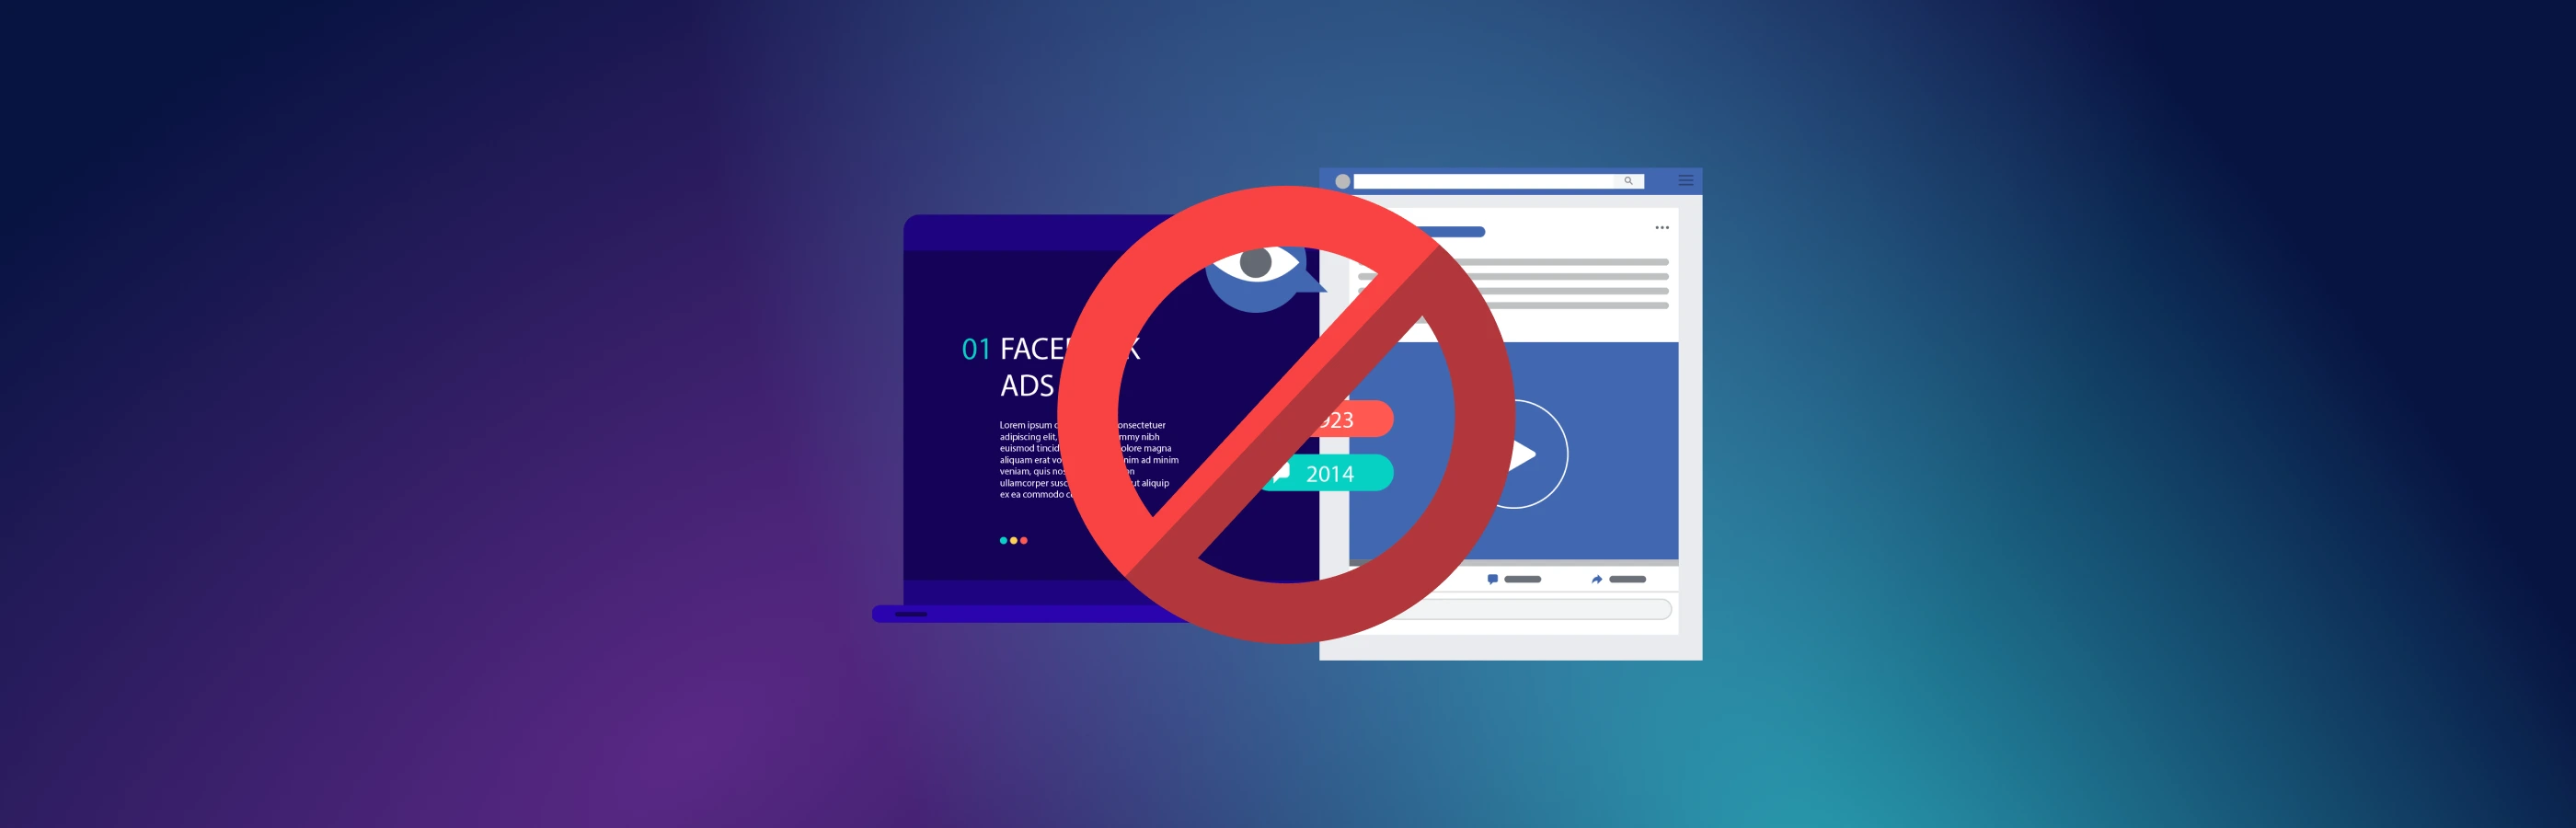 Facebook Stop Words: How to Avoid Blocking and Strengthen Your Profile